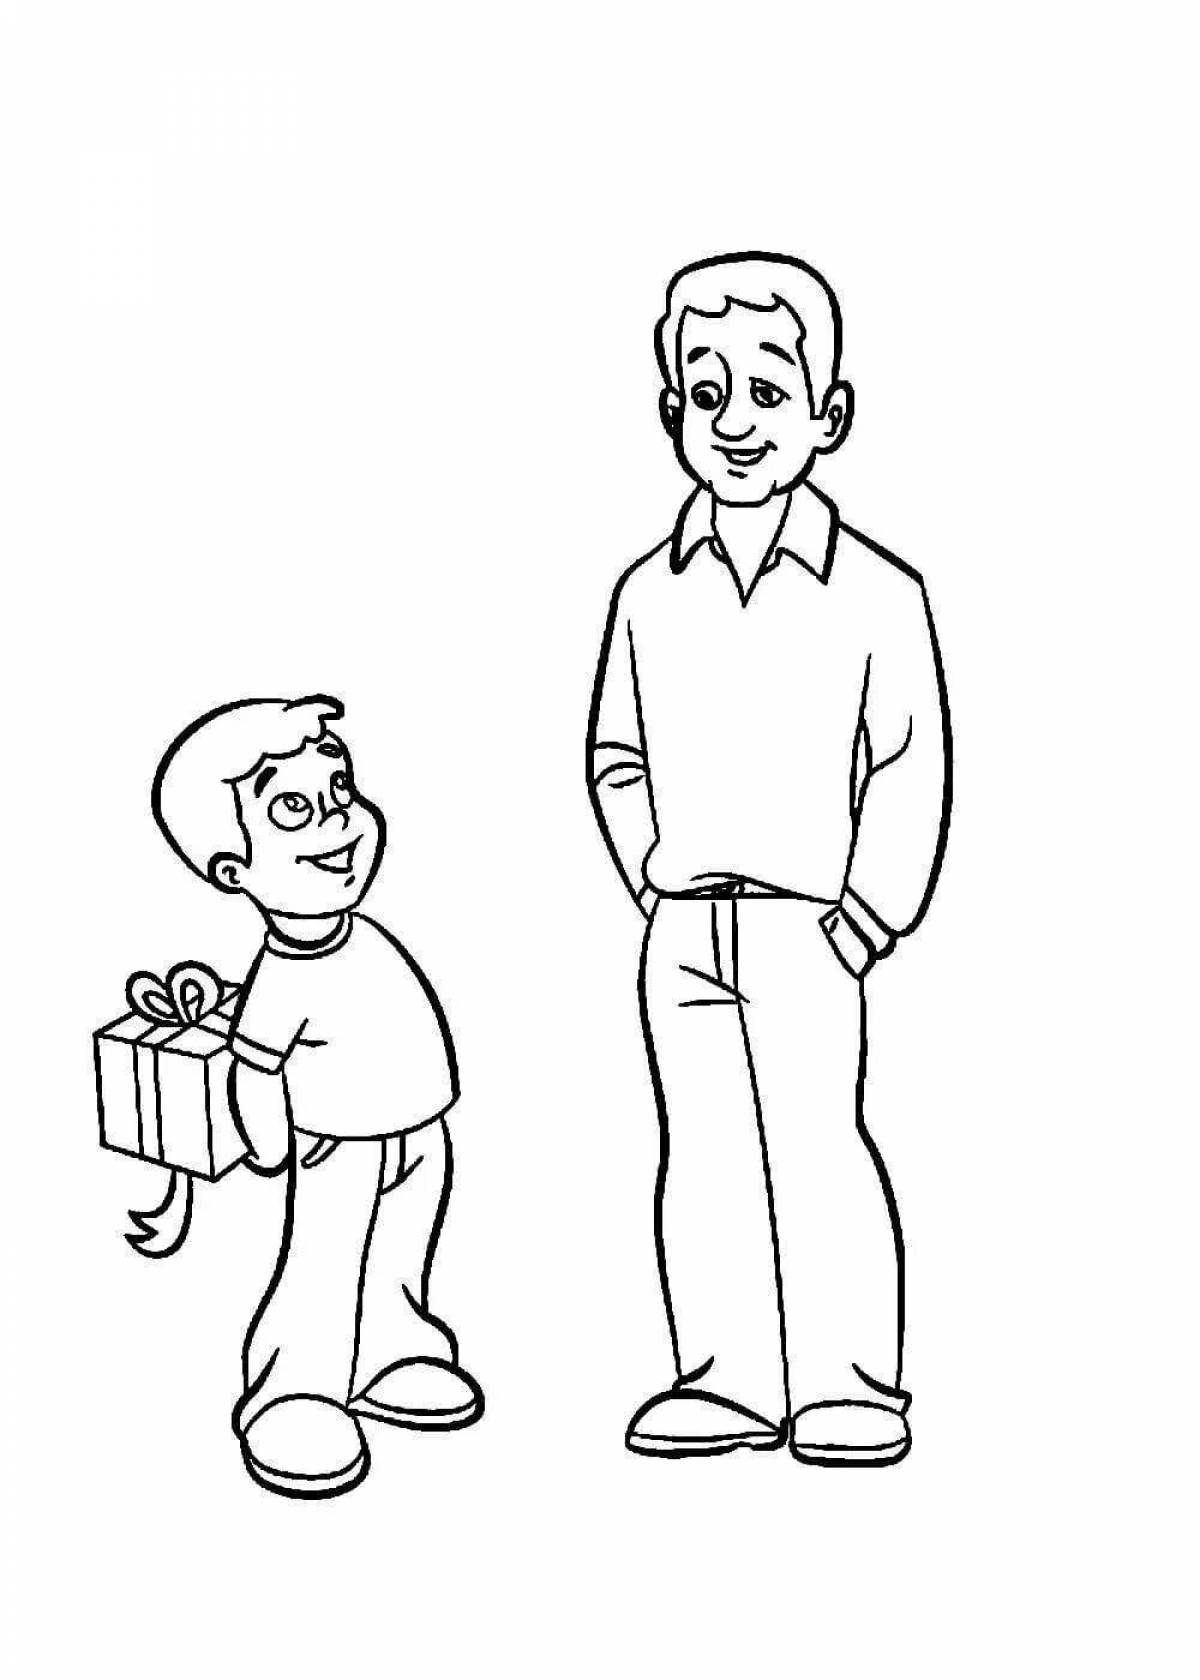 Charming son and dad coloring book